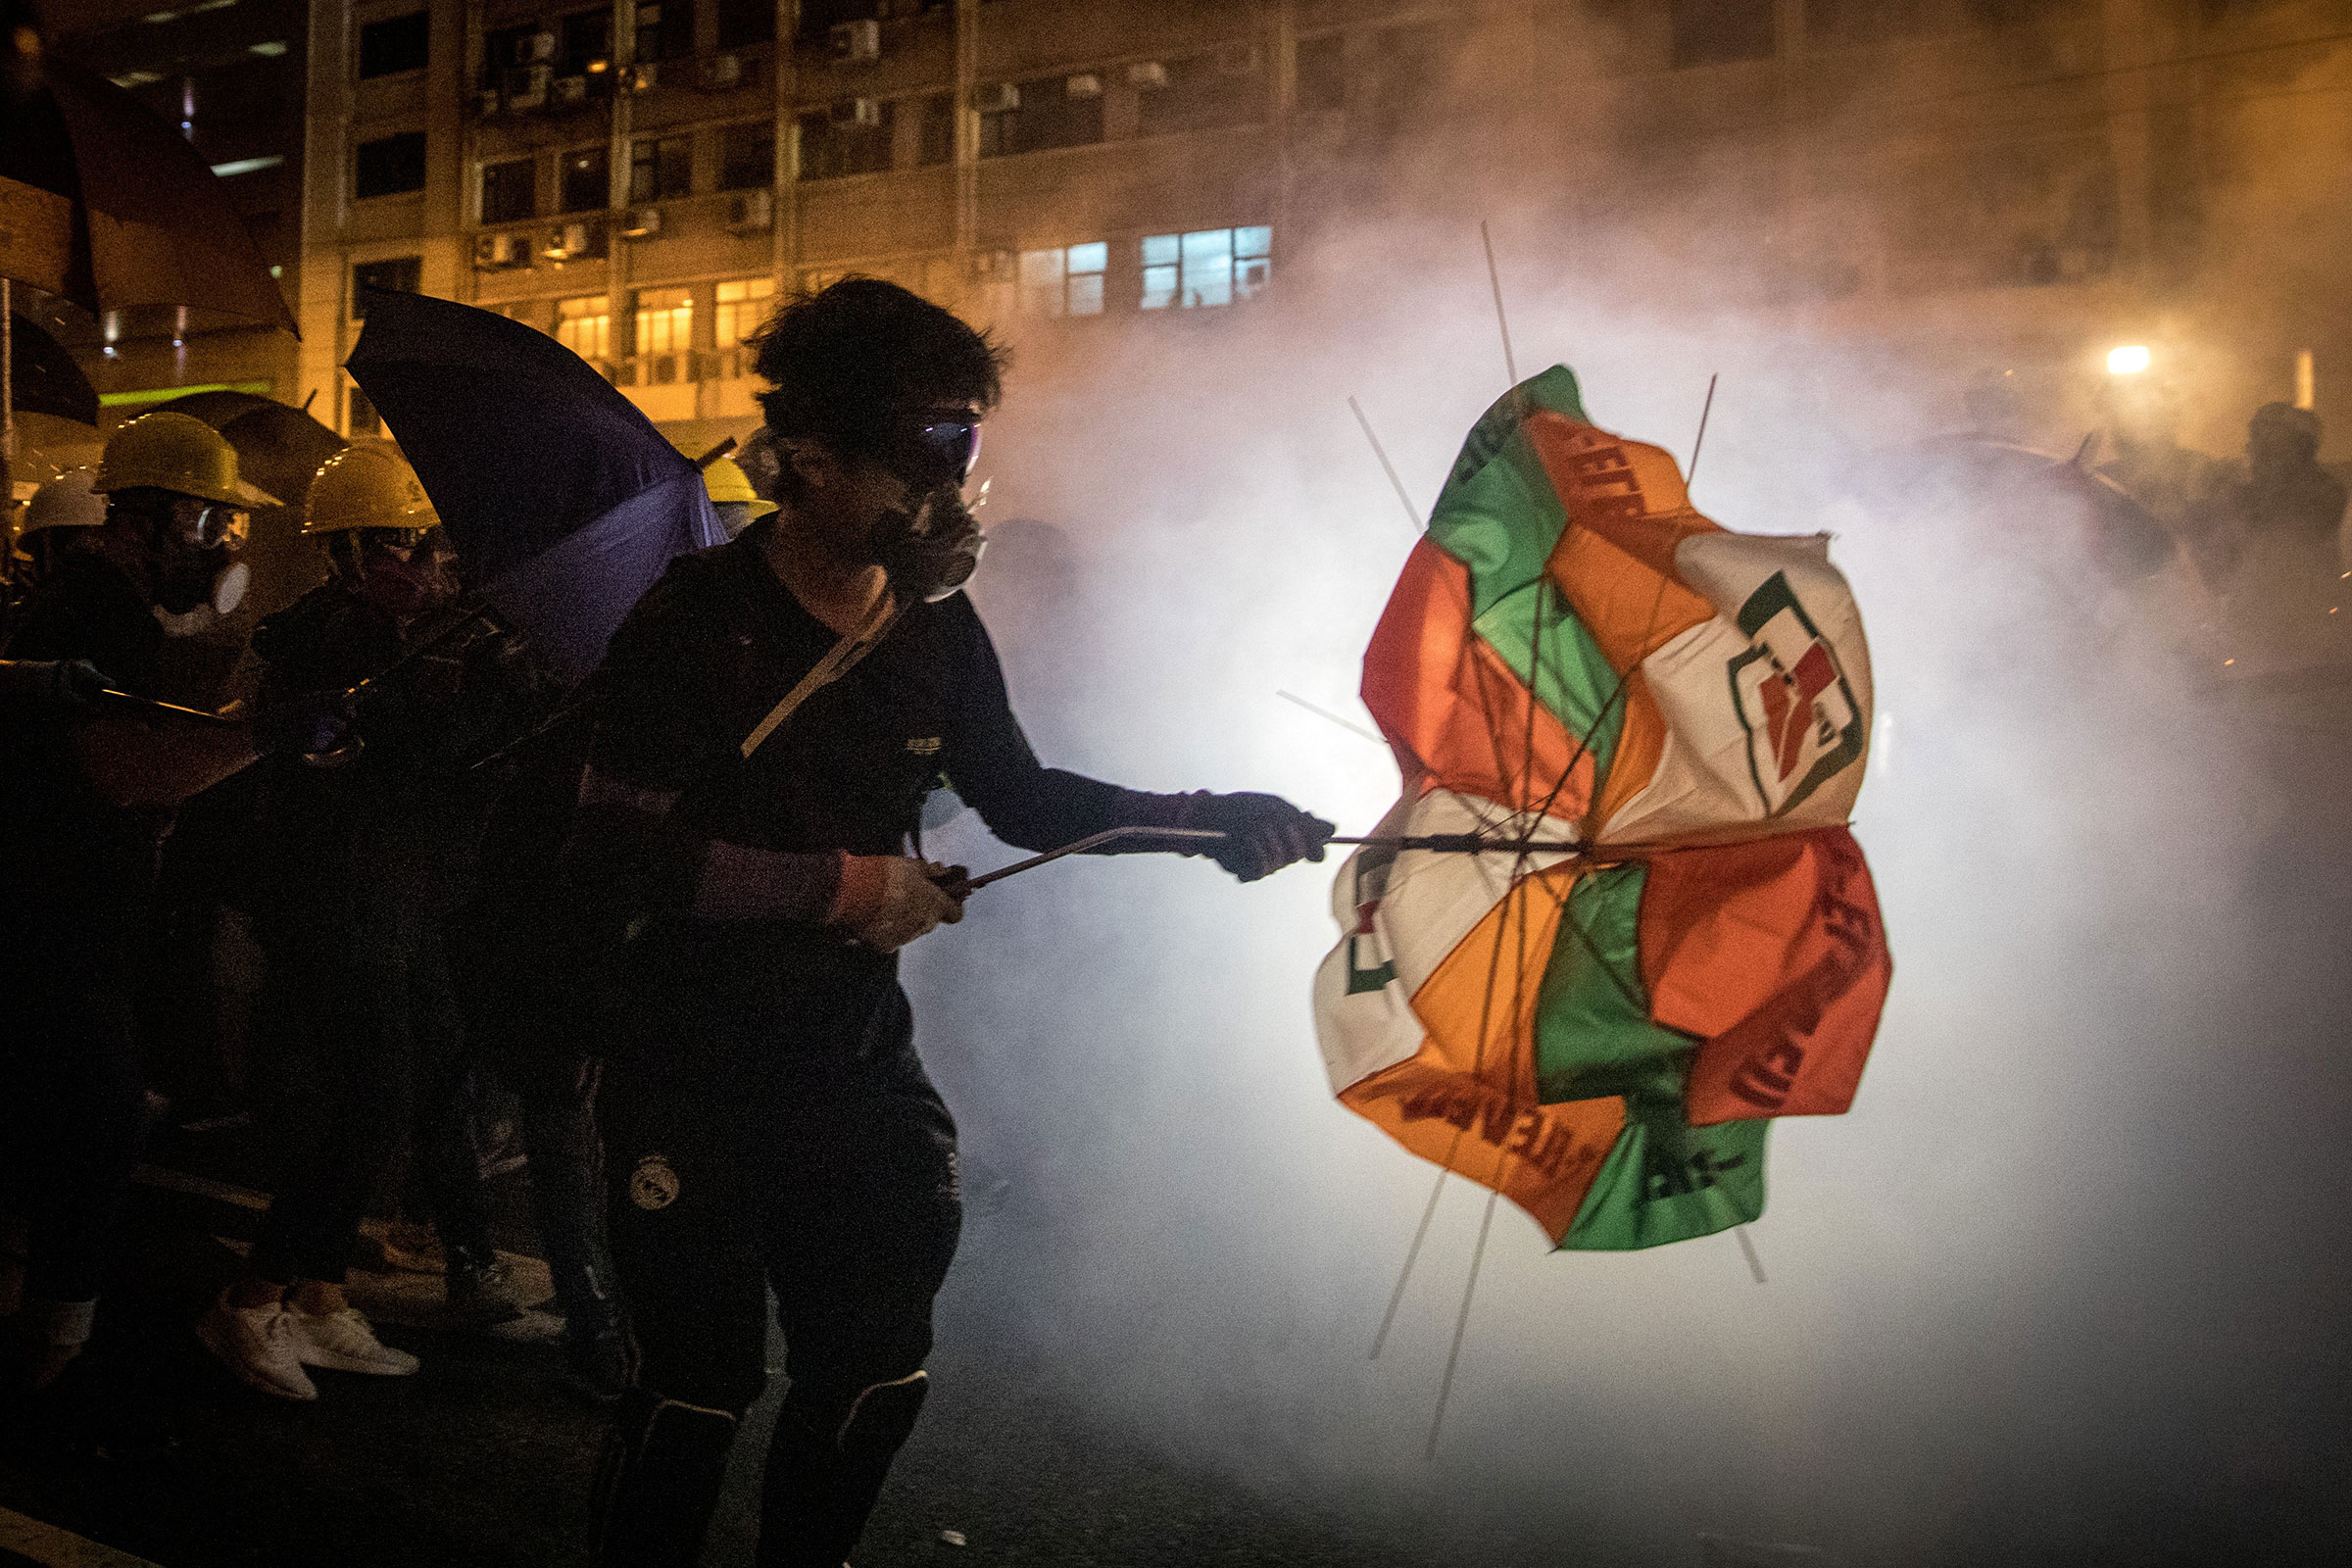 Protesters clash with police amid tear gas after taking part in an anti-extradition bill march on July 21 in Hong Kong. (Chris McGrath—Getty Images)